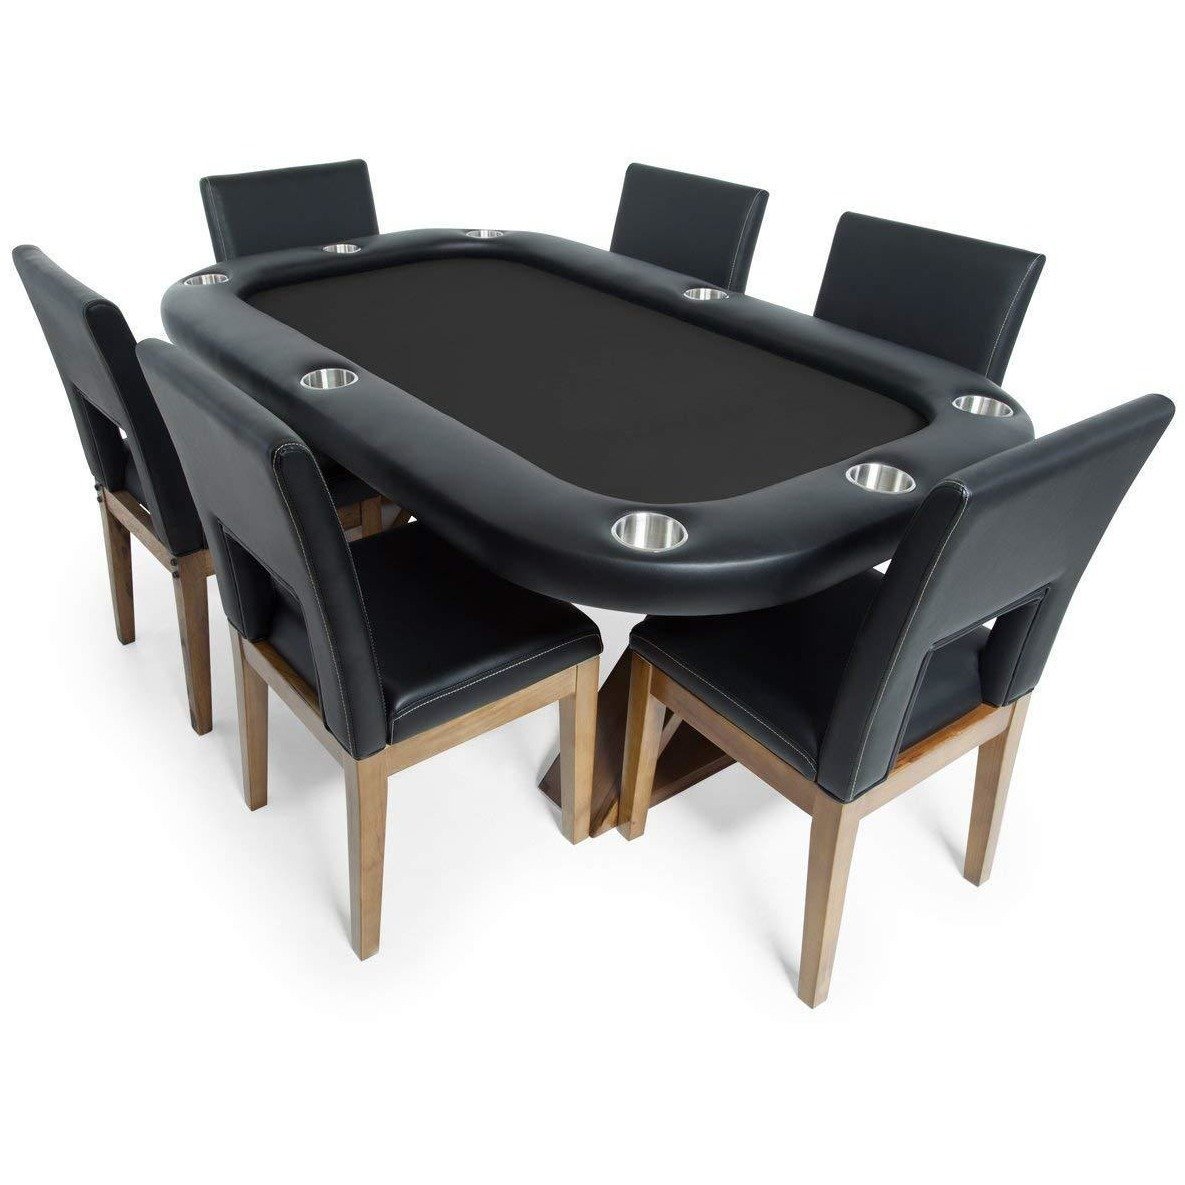 why do poker chairs have wheels